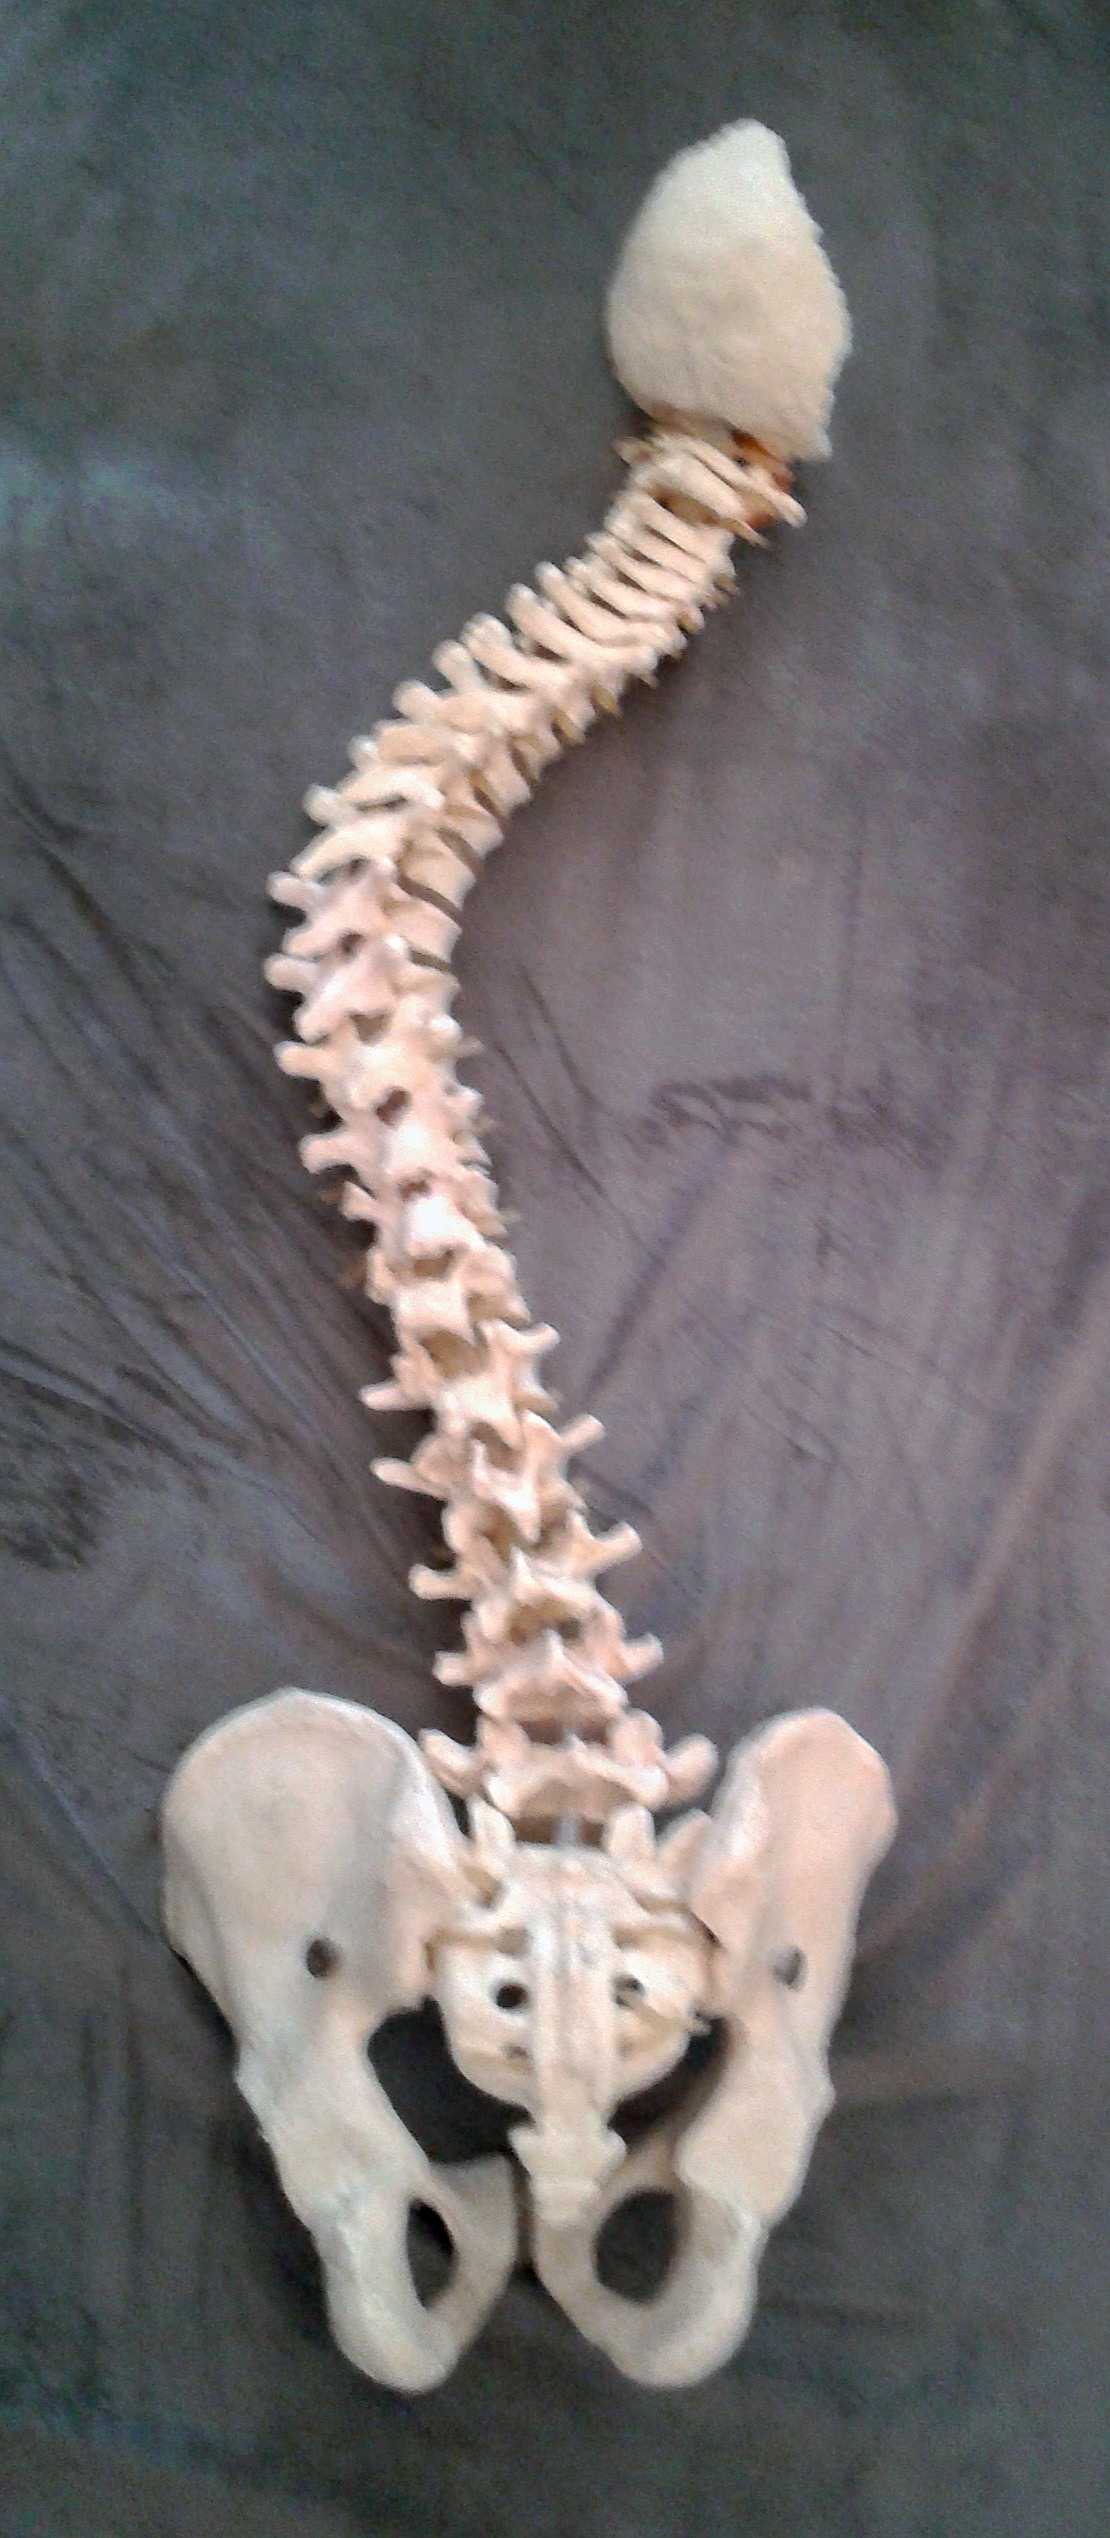 Spinal scoliosis